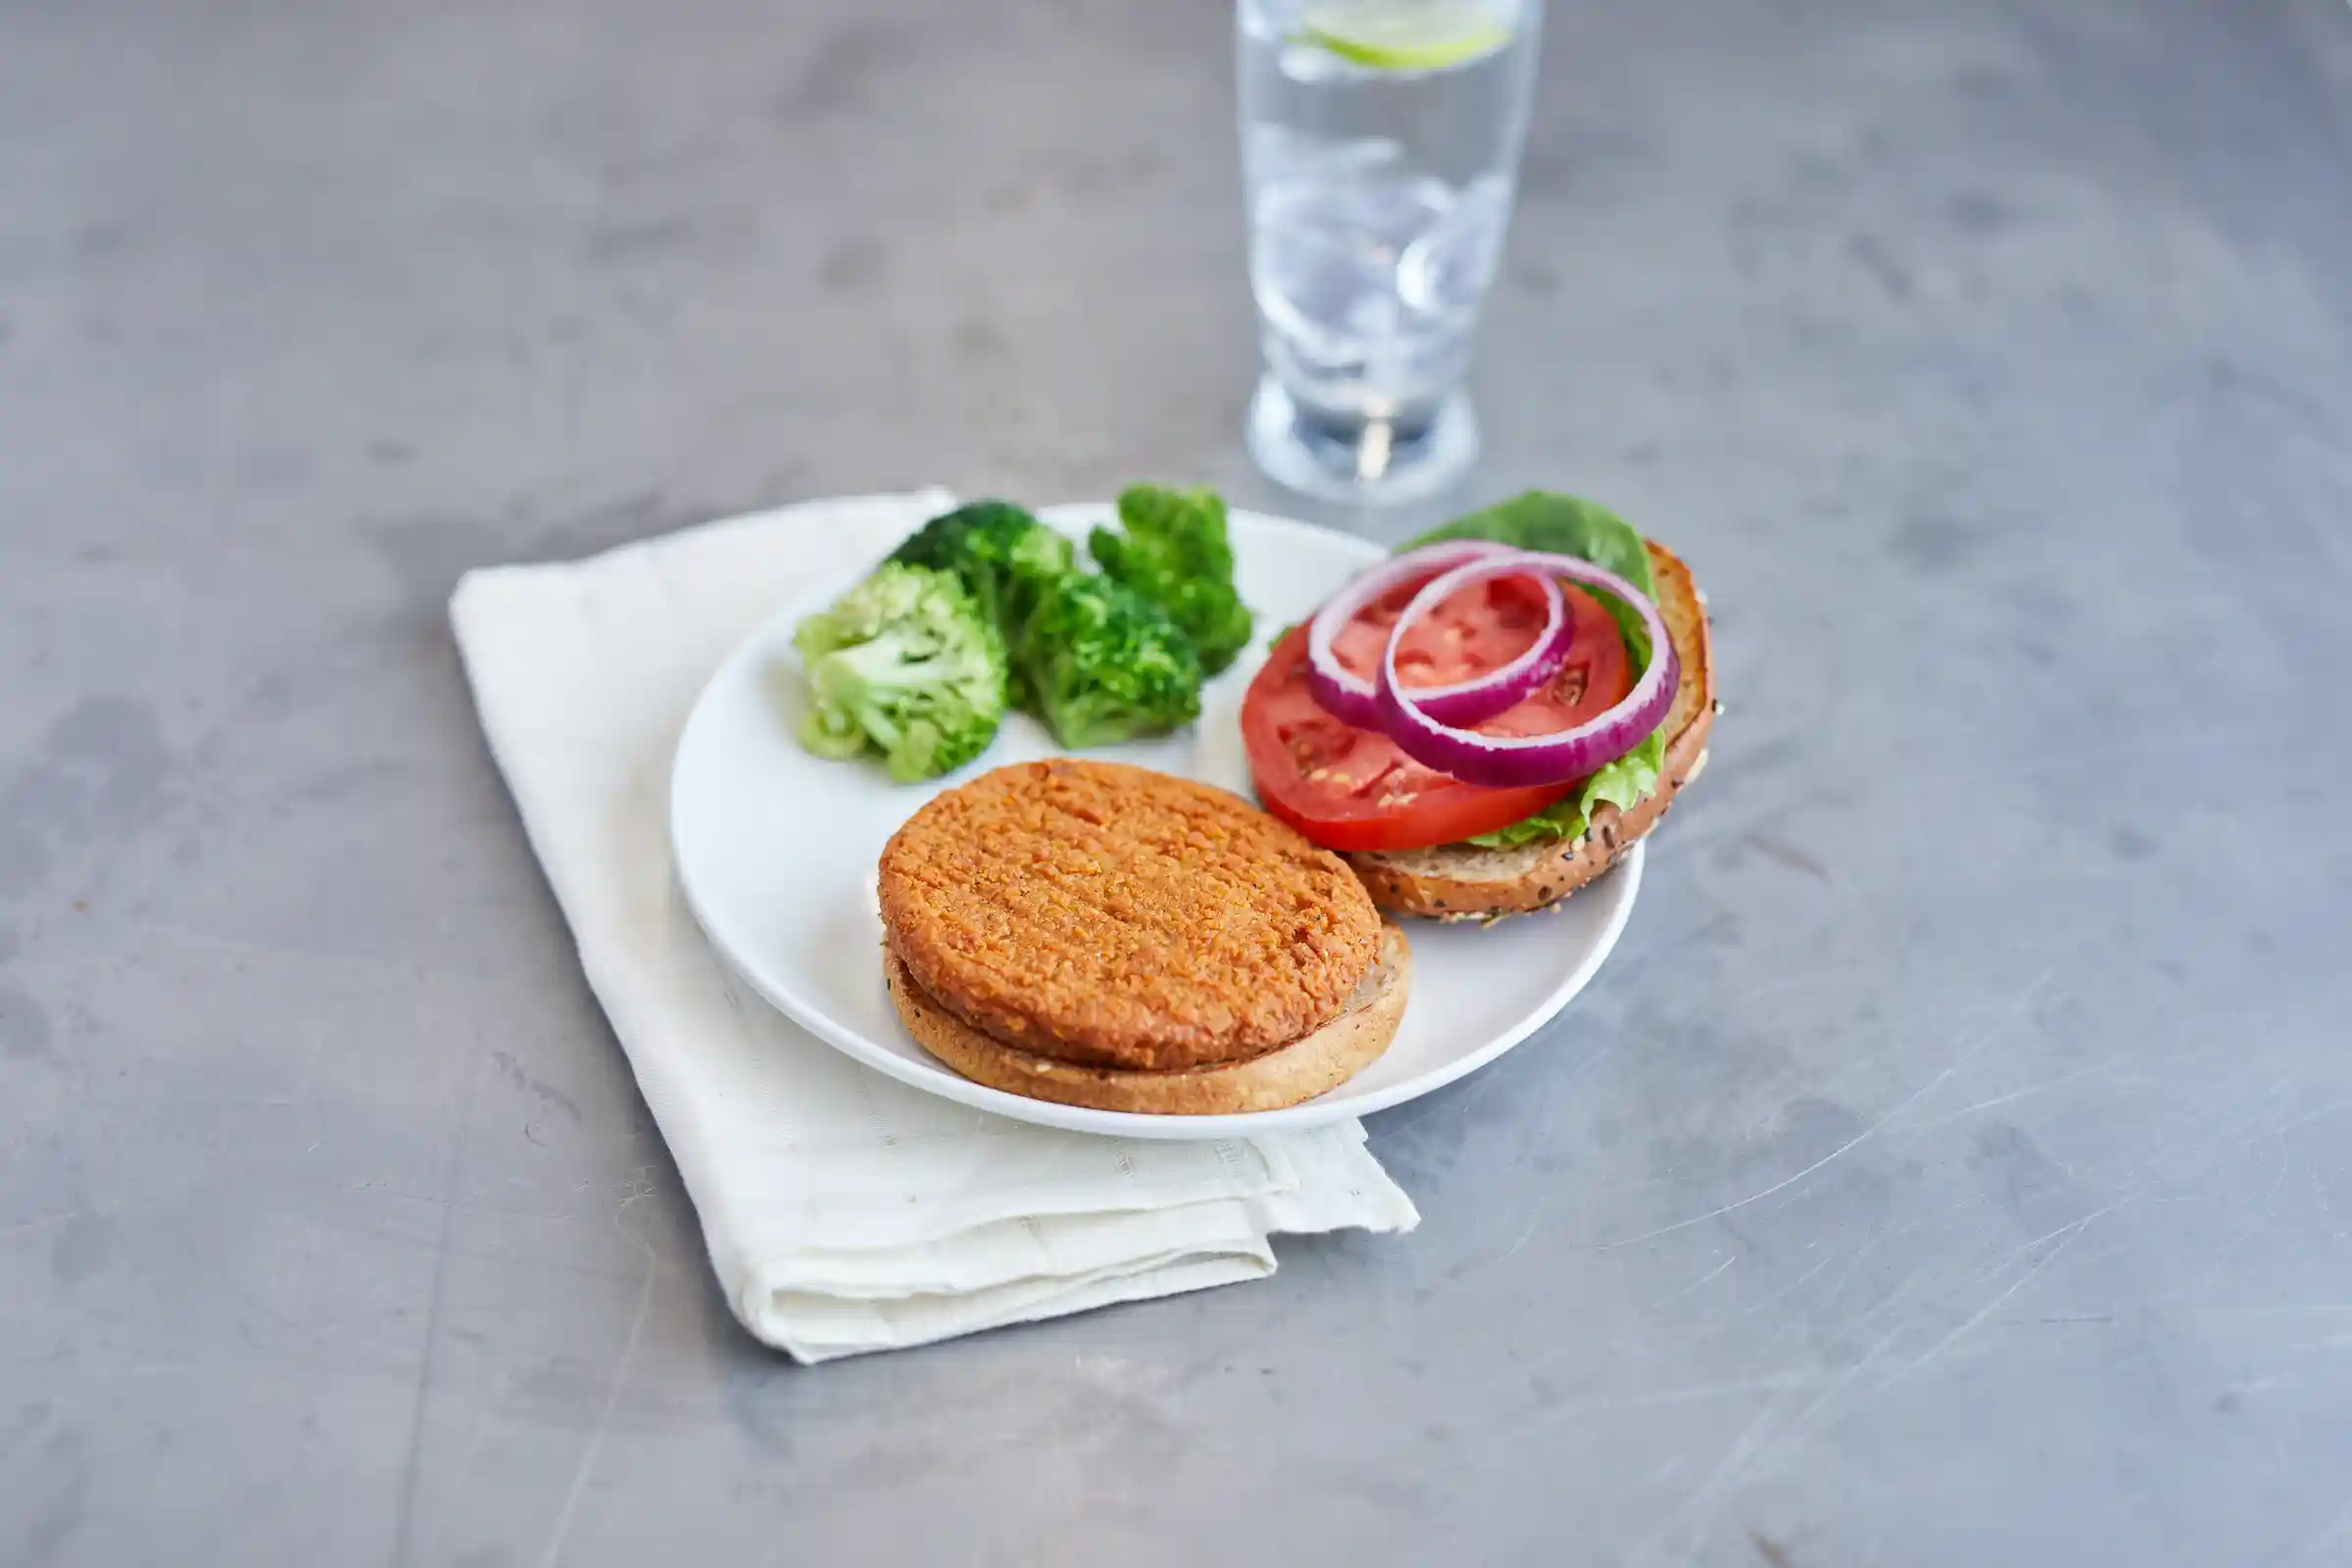 Tyson® Fully Cooked Whole Grain Breaded Hot & Spicy Chicken Patties, CN, 3.26 oz. https://images.salsify.com/image/upload/s--waMVEguh--/q_25/fu77guefxhf9xsjxrun7.webp